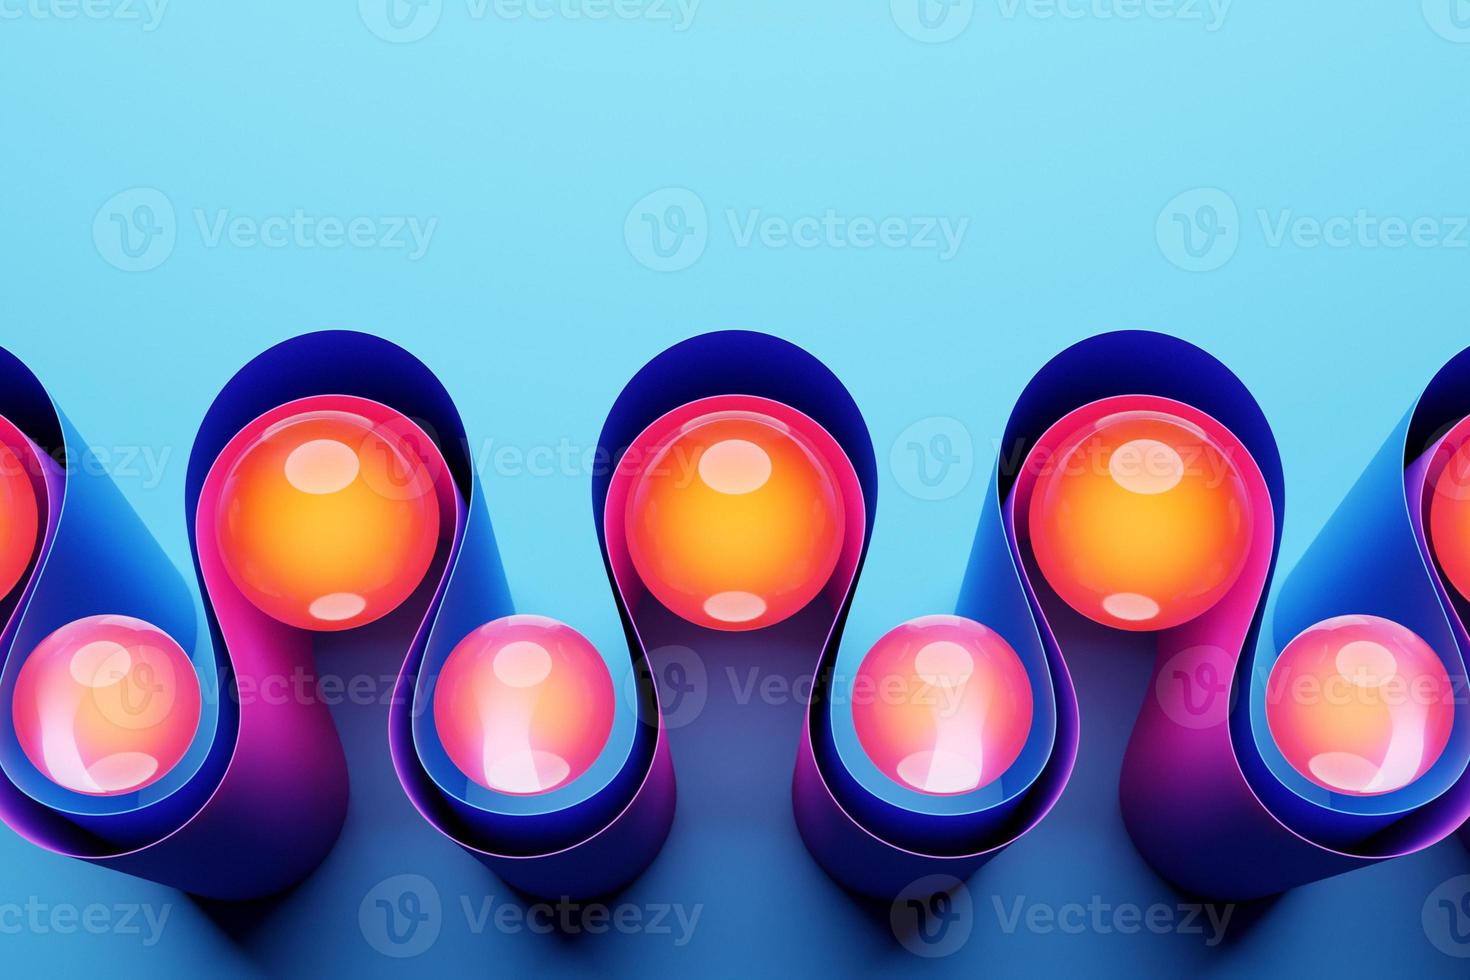 3d illustration of a geometric  blue wave surface with glowing colorful balls inside. Pattern of simple geometric shapes photo